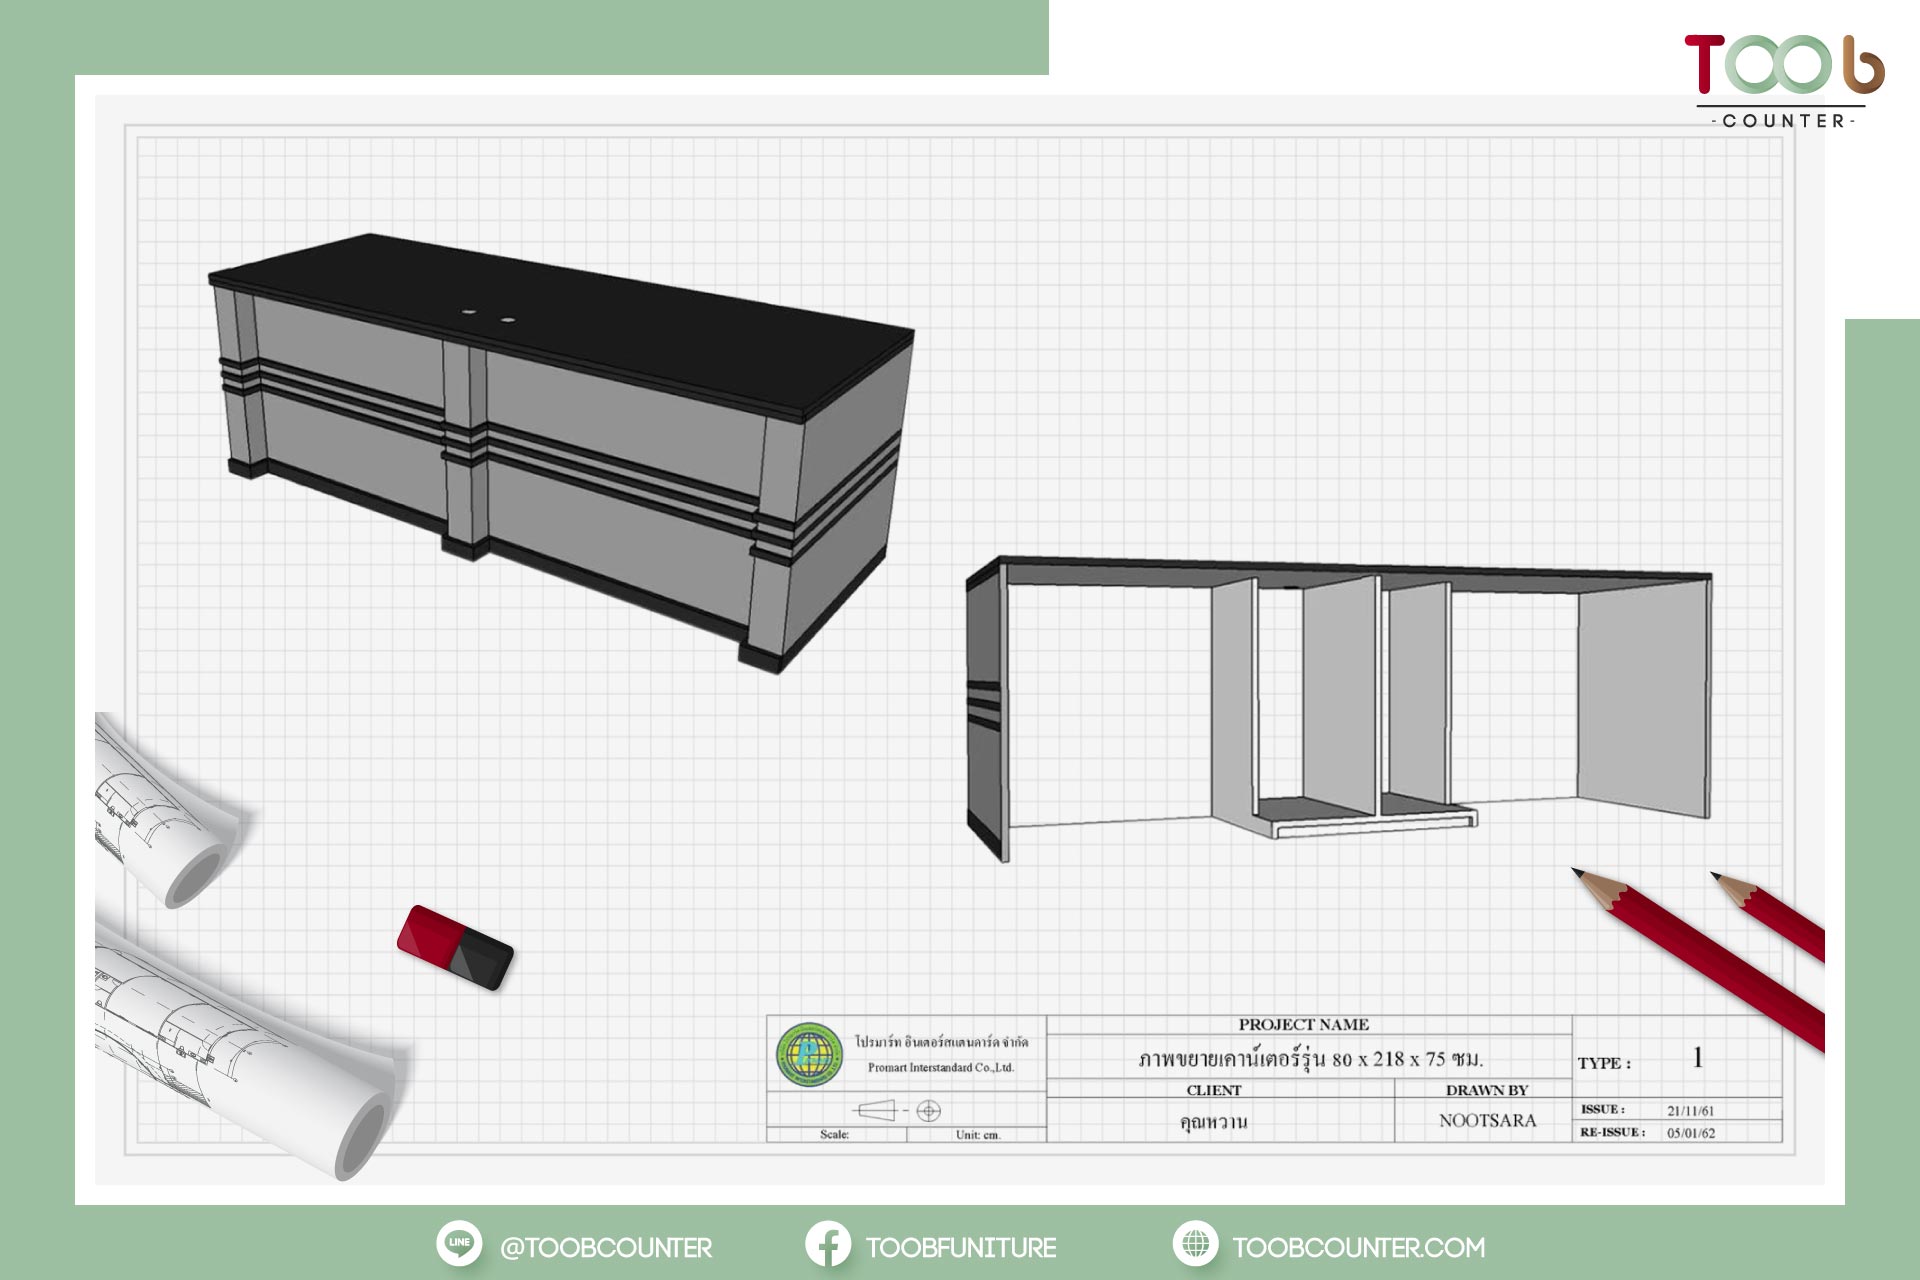 Drawing perspective view design cool office counter